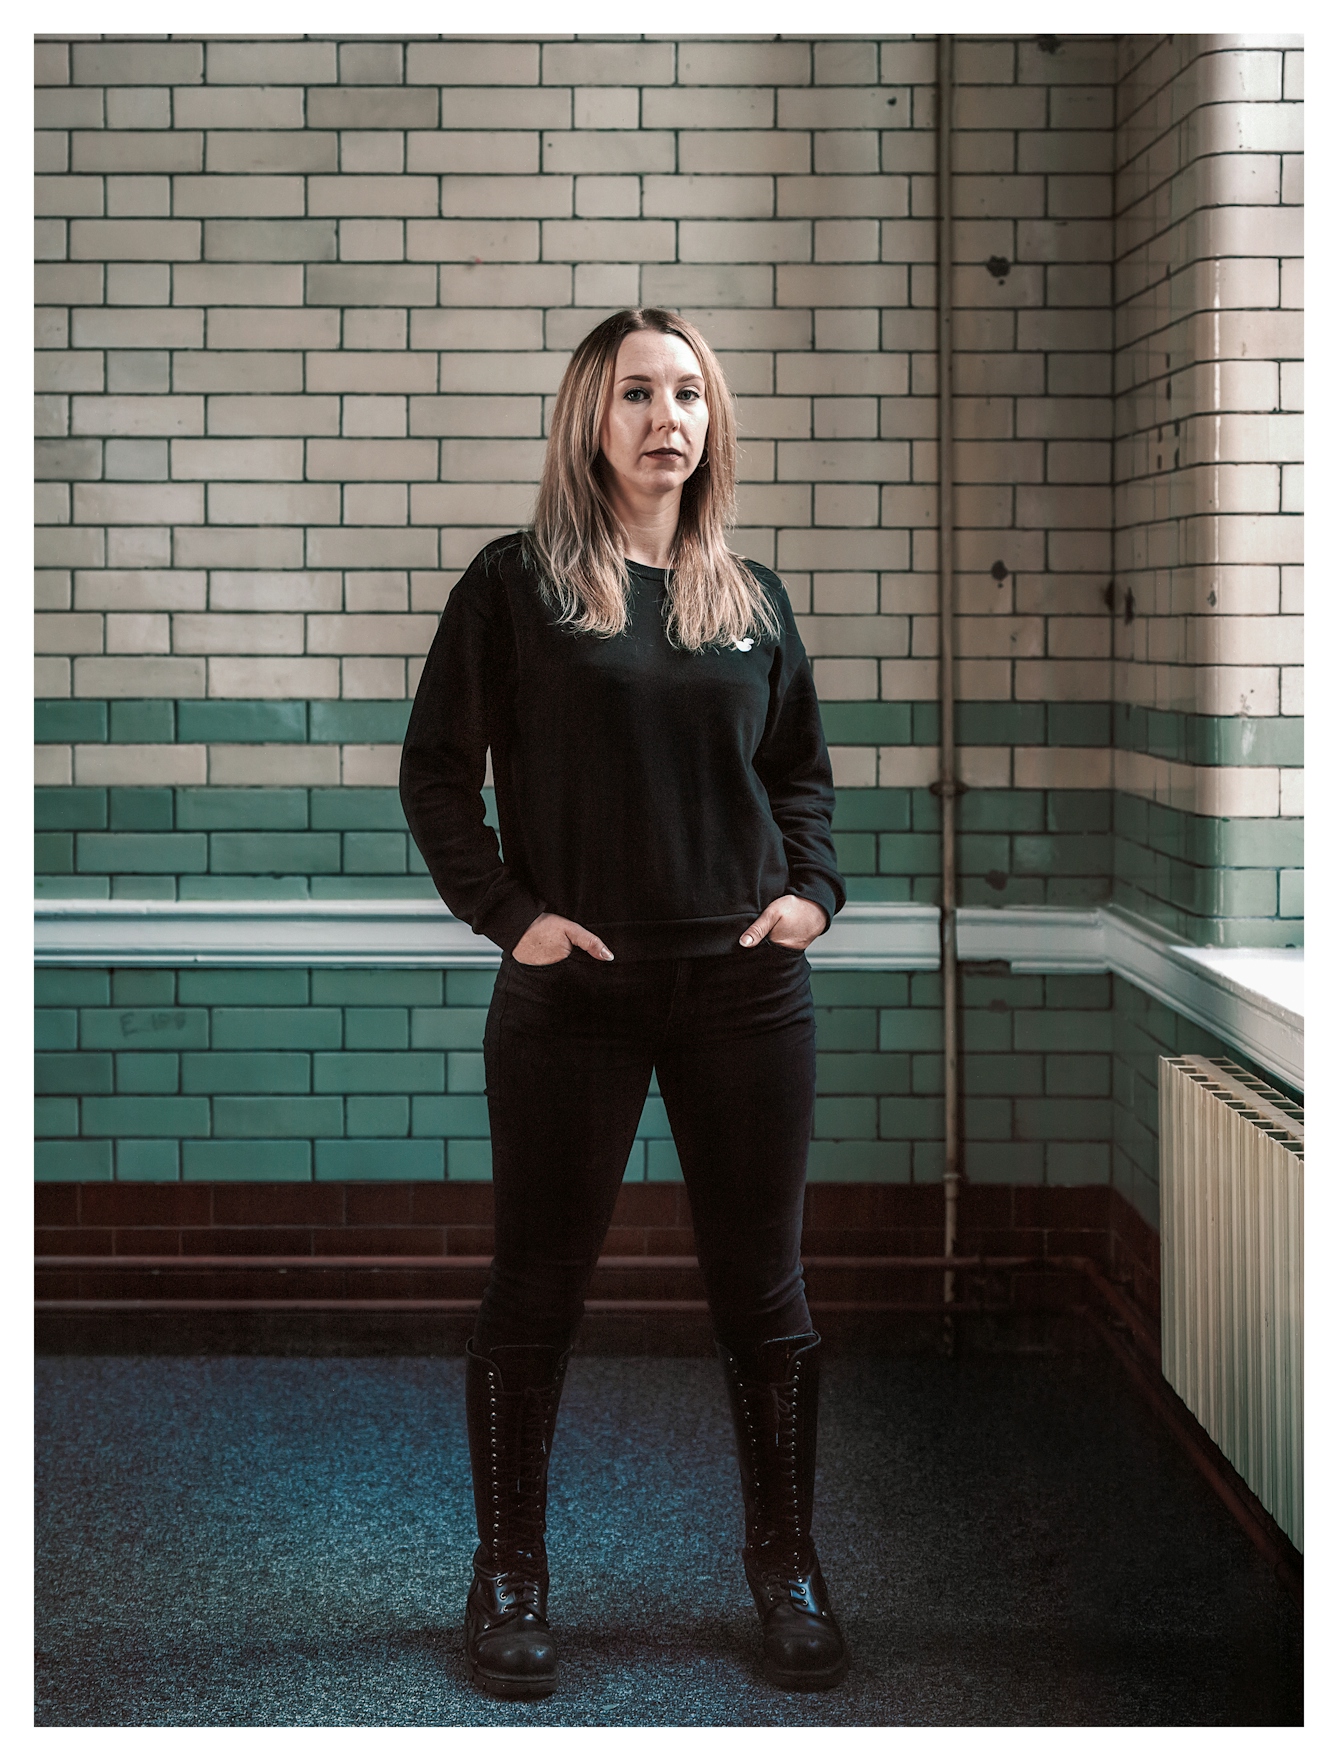 Photographic full length portrait of a woman standing looking to camera with her hands resting in the pockets of her black trousers. She is wearing a black long sleeved top and knee high lace up black boots. She is lit by a soft light from a large window just out of frame to the right. Behind her are the glossy tiled walls of a Victoria period building. The tiles are beige and green and are arranged in a horizontal pattern.